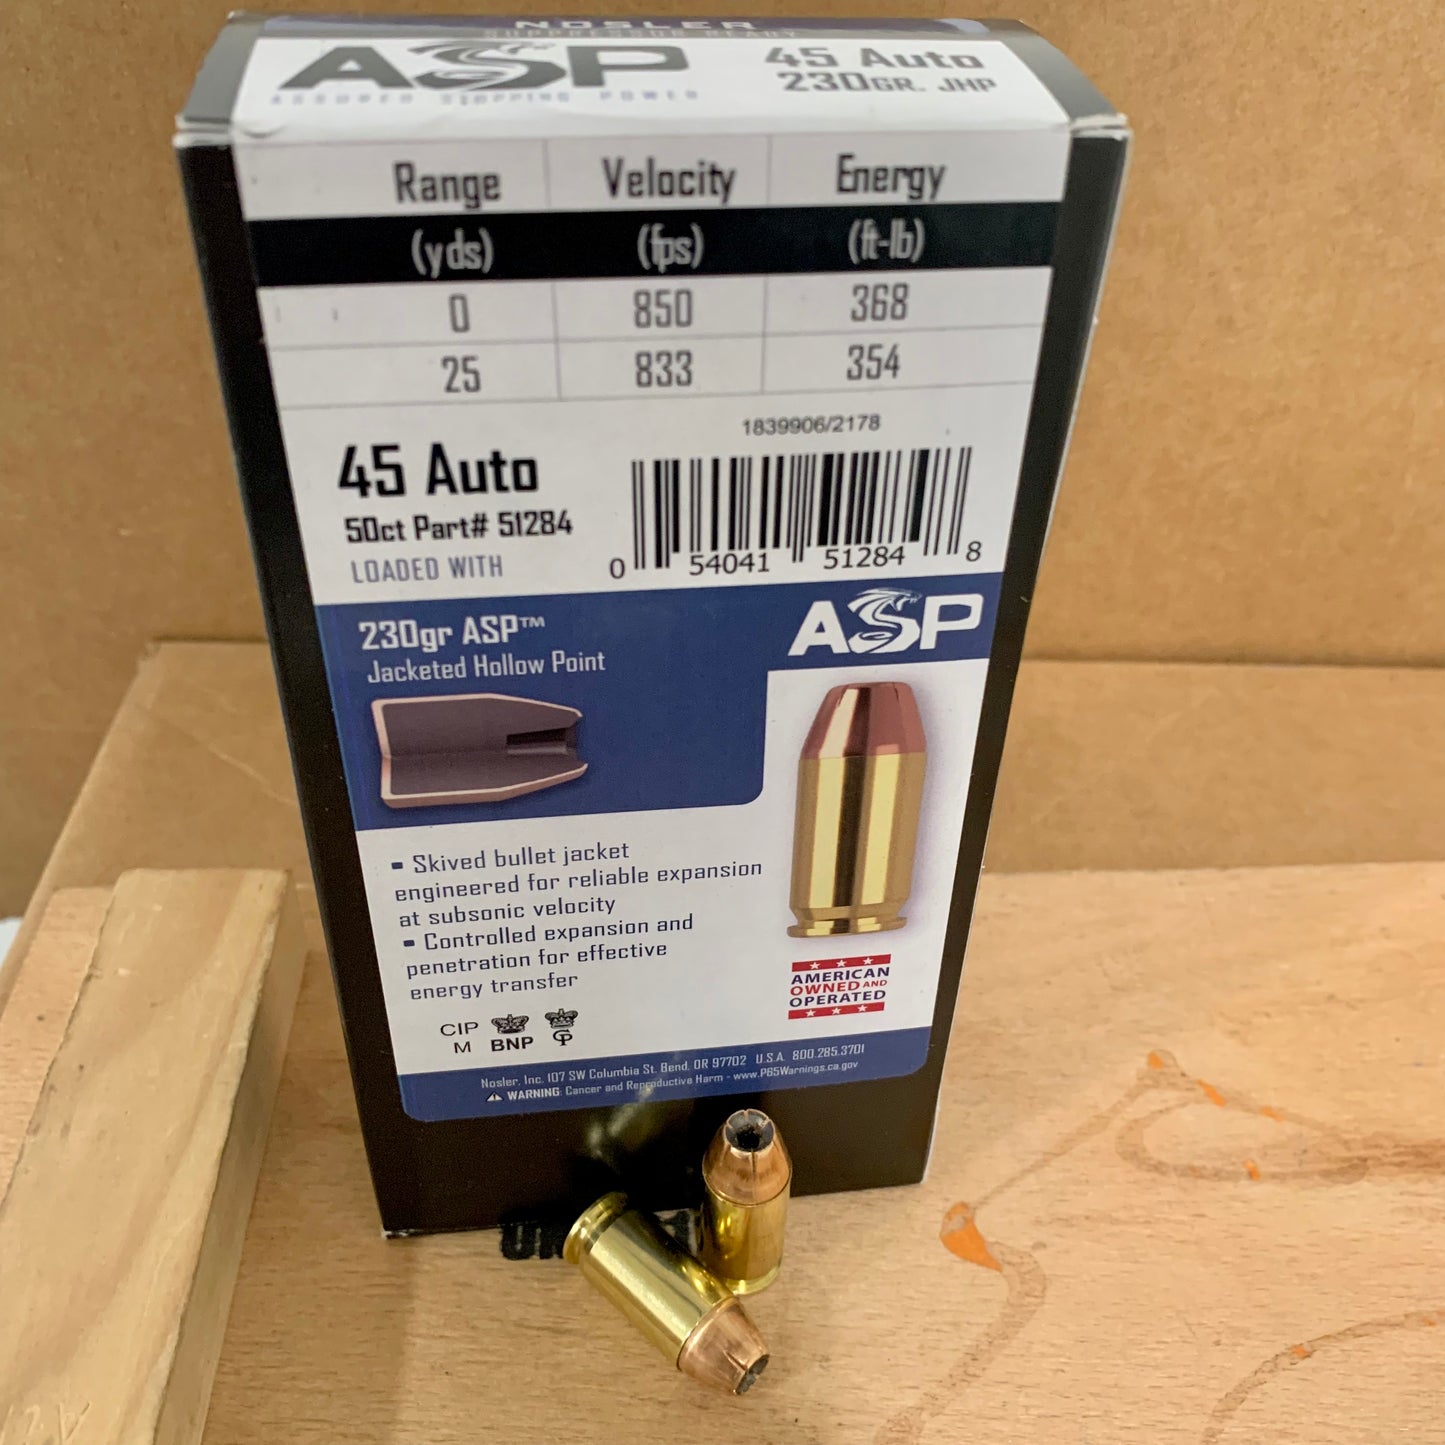 50 Count Box Nosler Assured Stopping Power .45 ACP / Auto Ammo 230gr JHP ASP - 51284